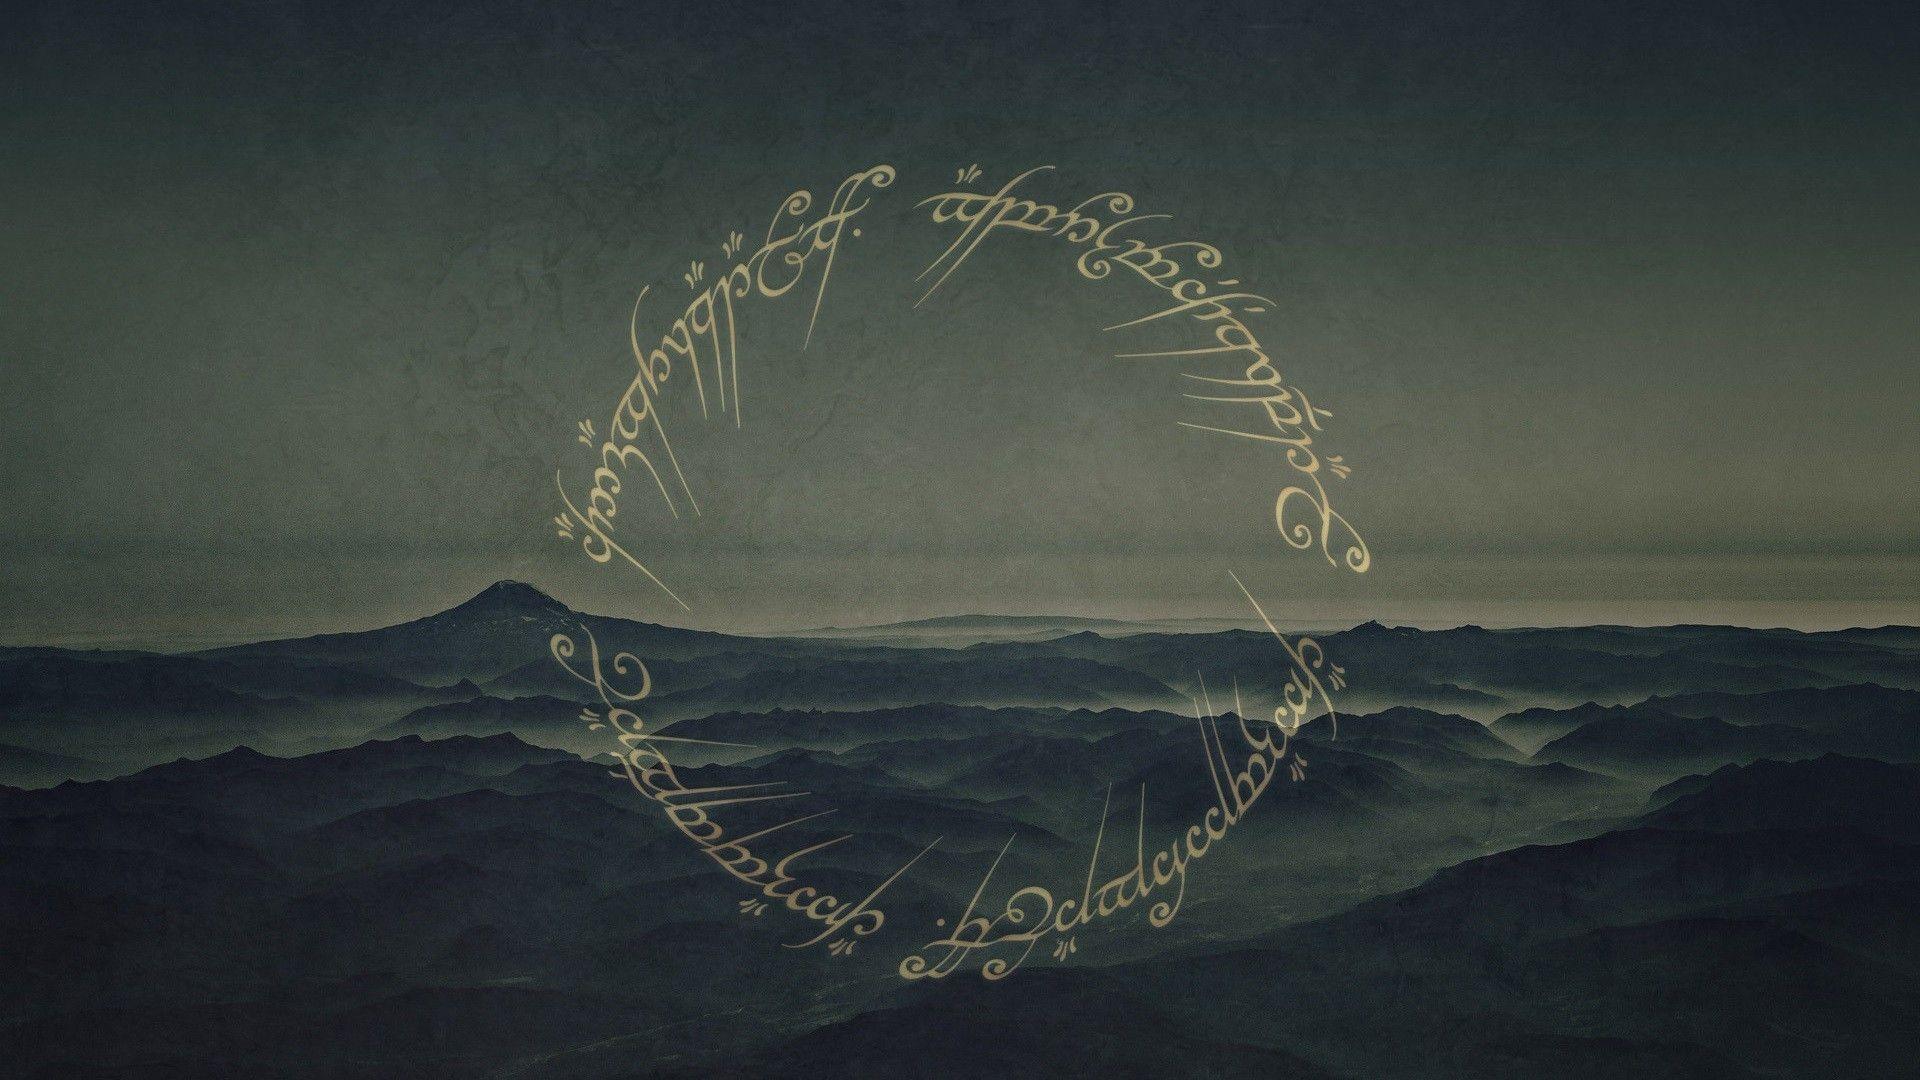 Awesome Lord of the Rings Wallpaper. Lord, Wallpaper and Ring